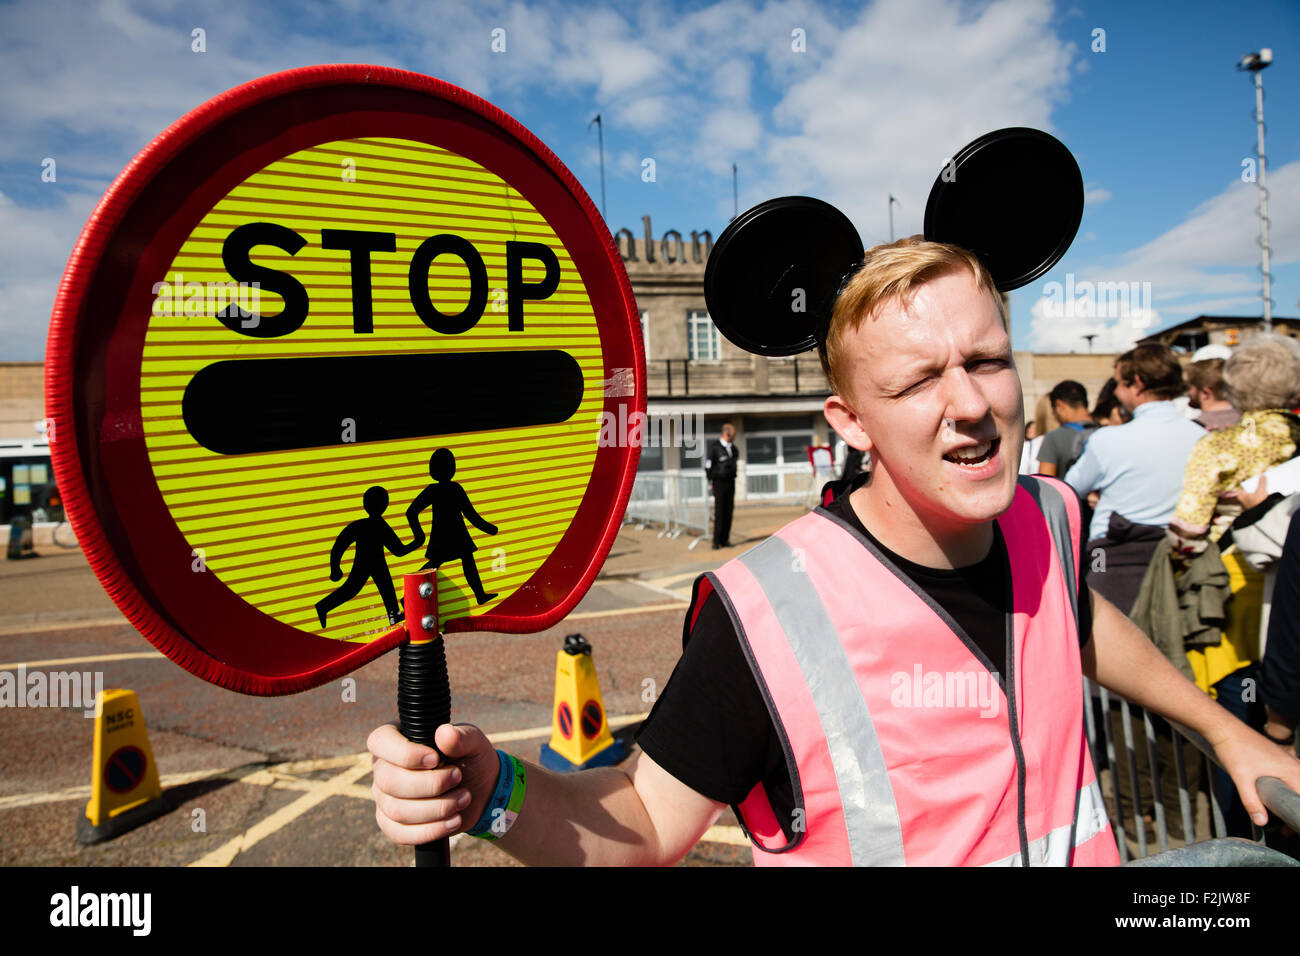 A mouse eared lollipop man herding visitors across the road to Banksy's Dismaland theme park attraction in Weston super Mare UK Stock Photo